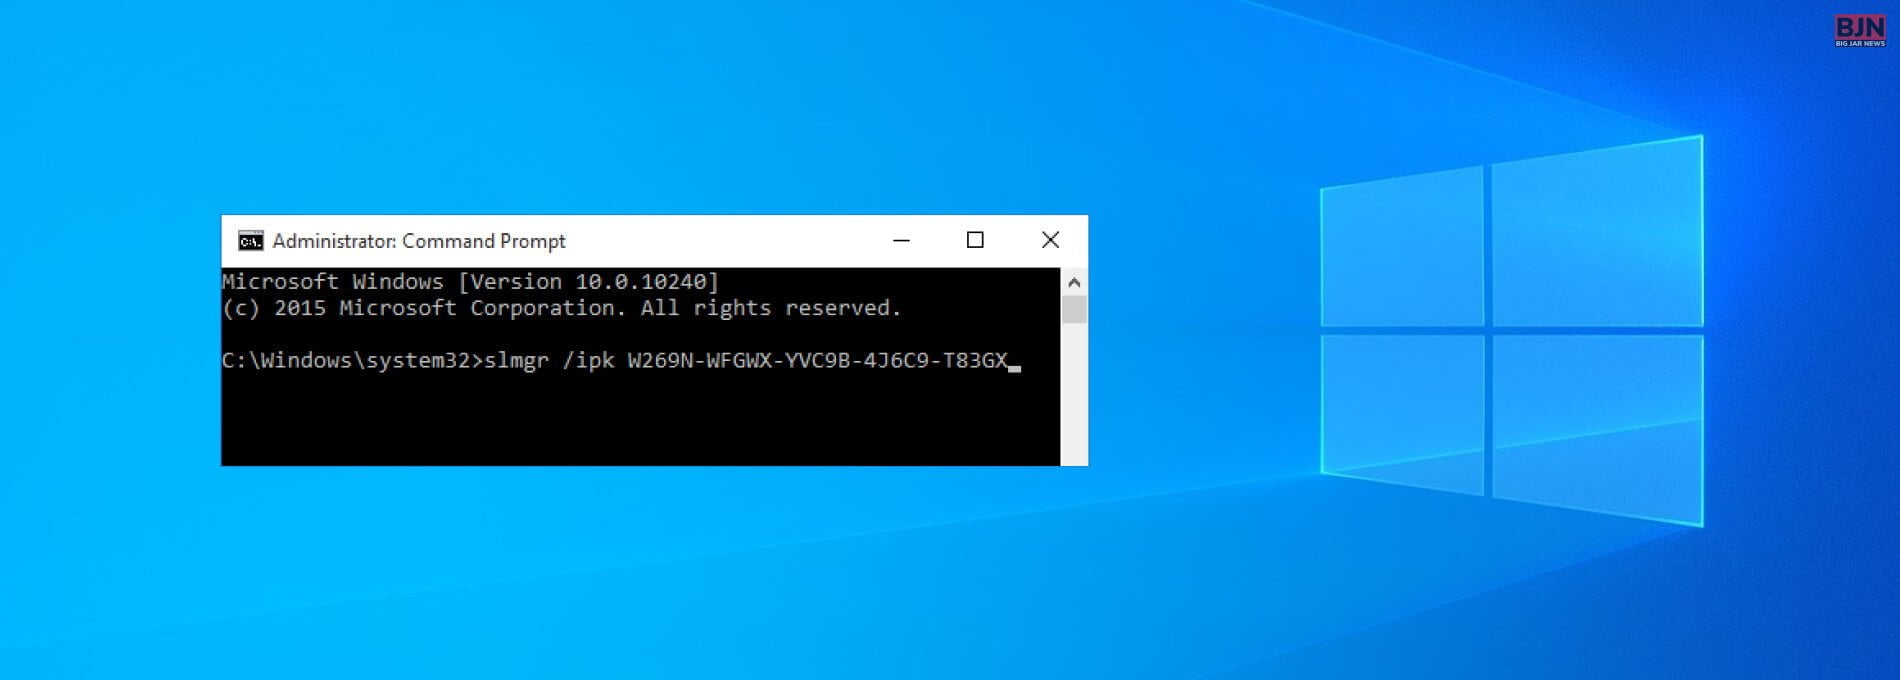 How To Activate Windows 10 Using Cmd Step By Step Guide 9801